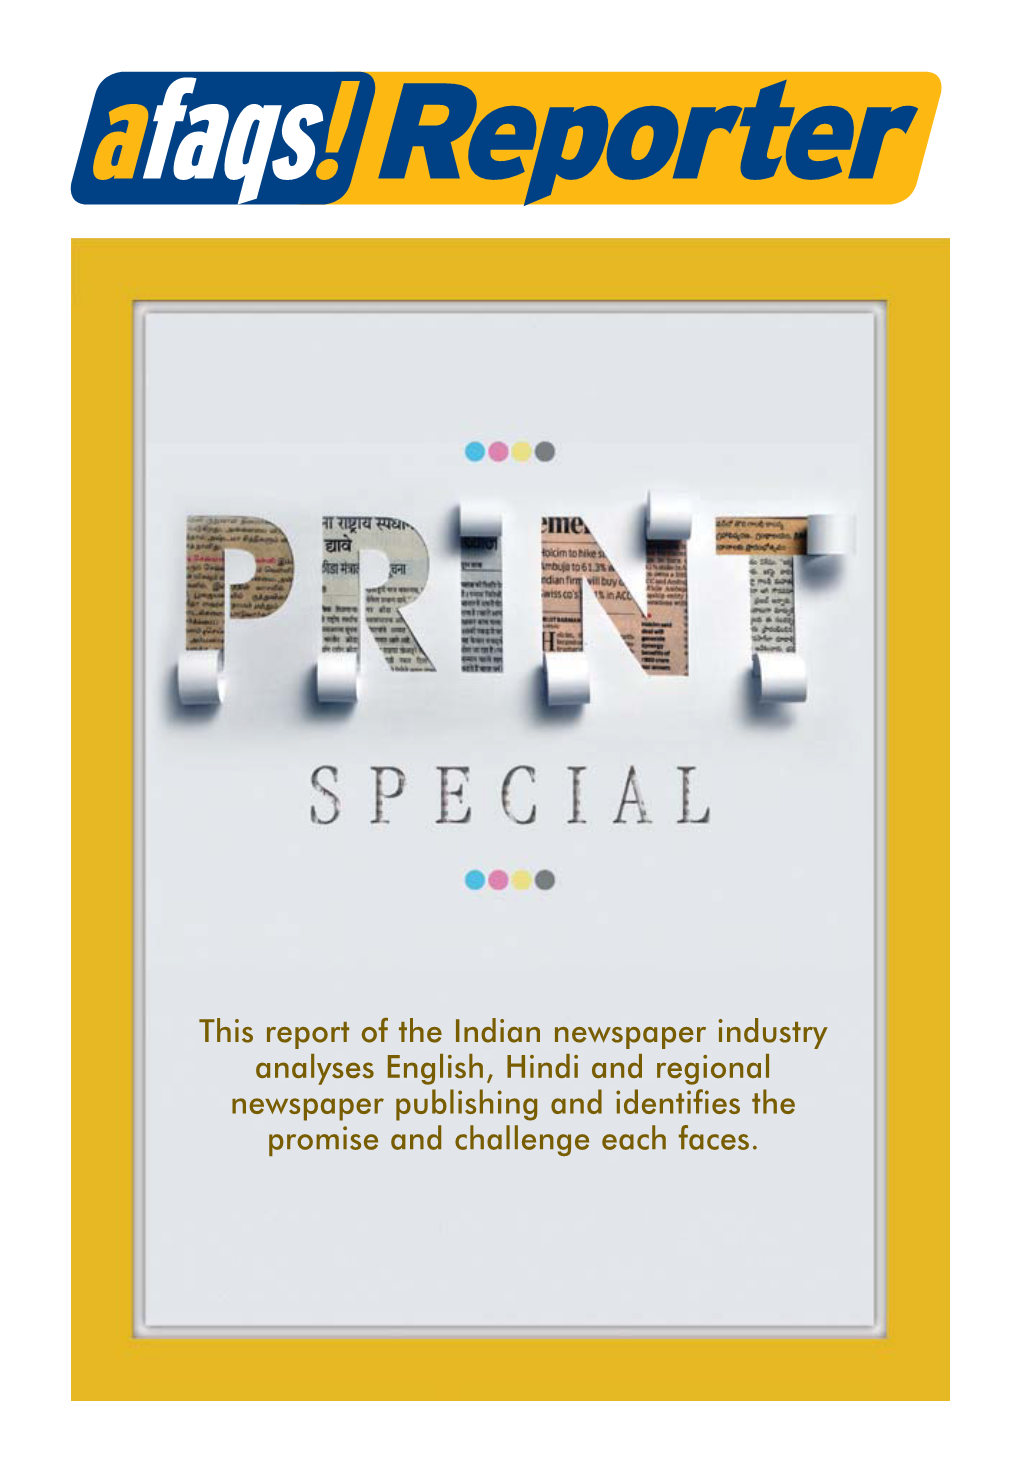 This Report of the Indian Newspaper Industry Analyses English, Hindi and Regional Newspaper Publishing and Identifies the Promise and Challenge Each Faces